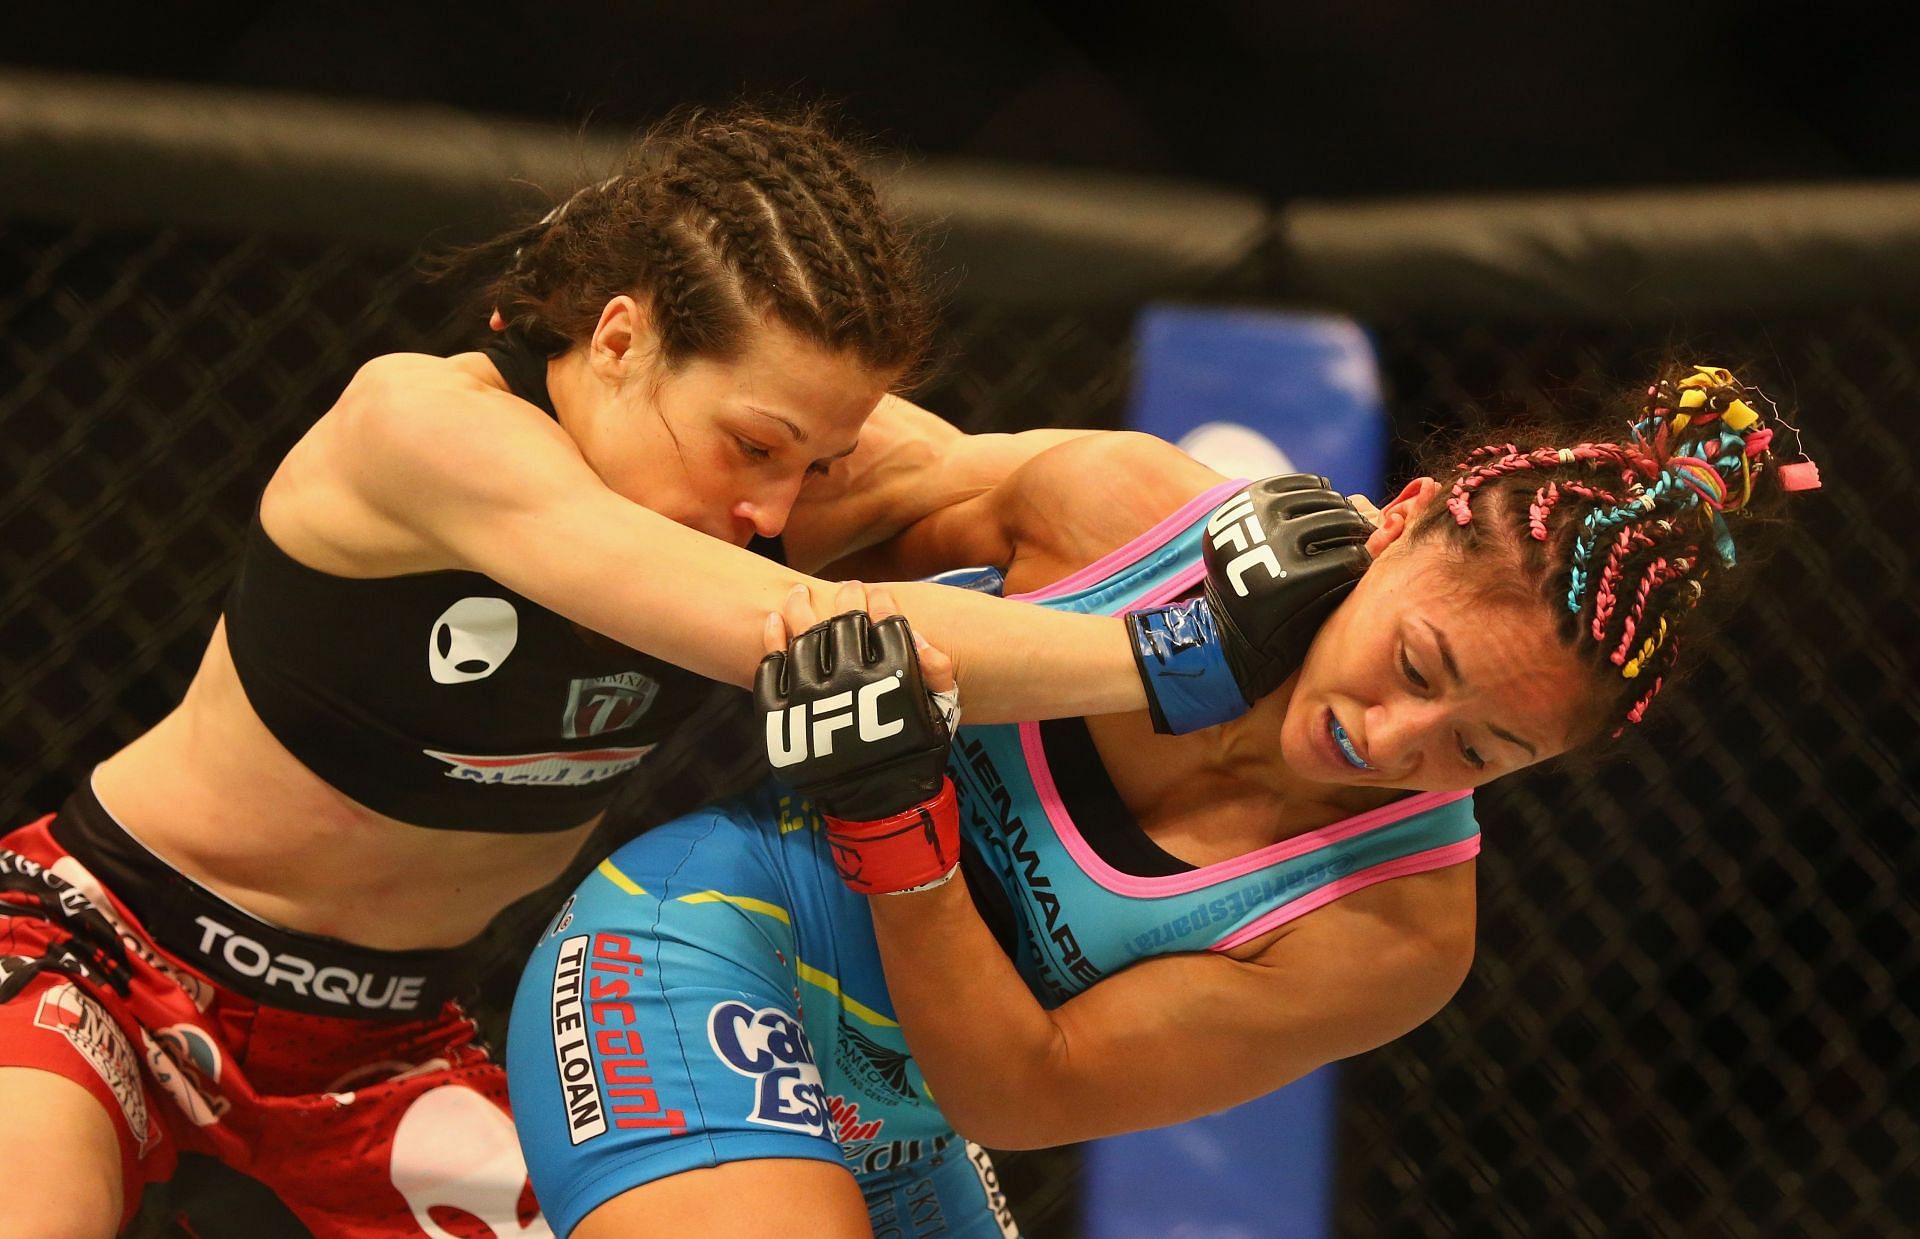 Esparza and Jedrzejczyk have a combined record of 16-7 since their first fight